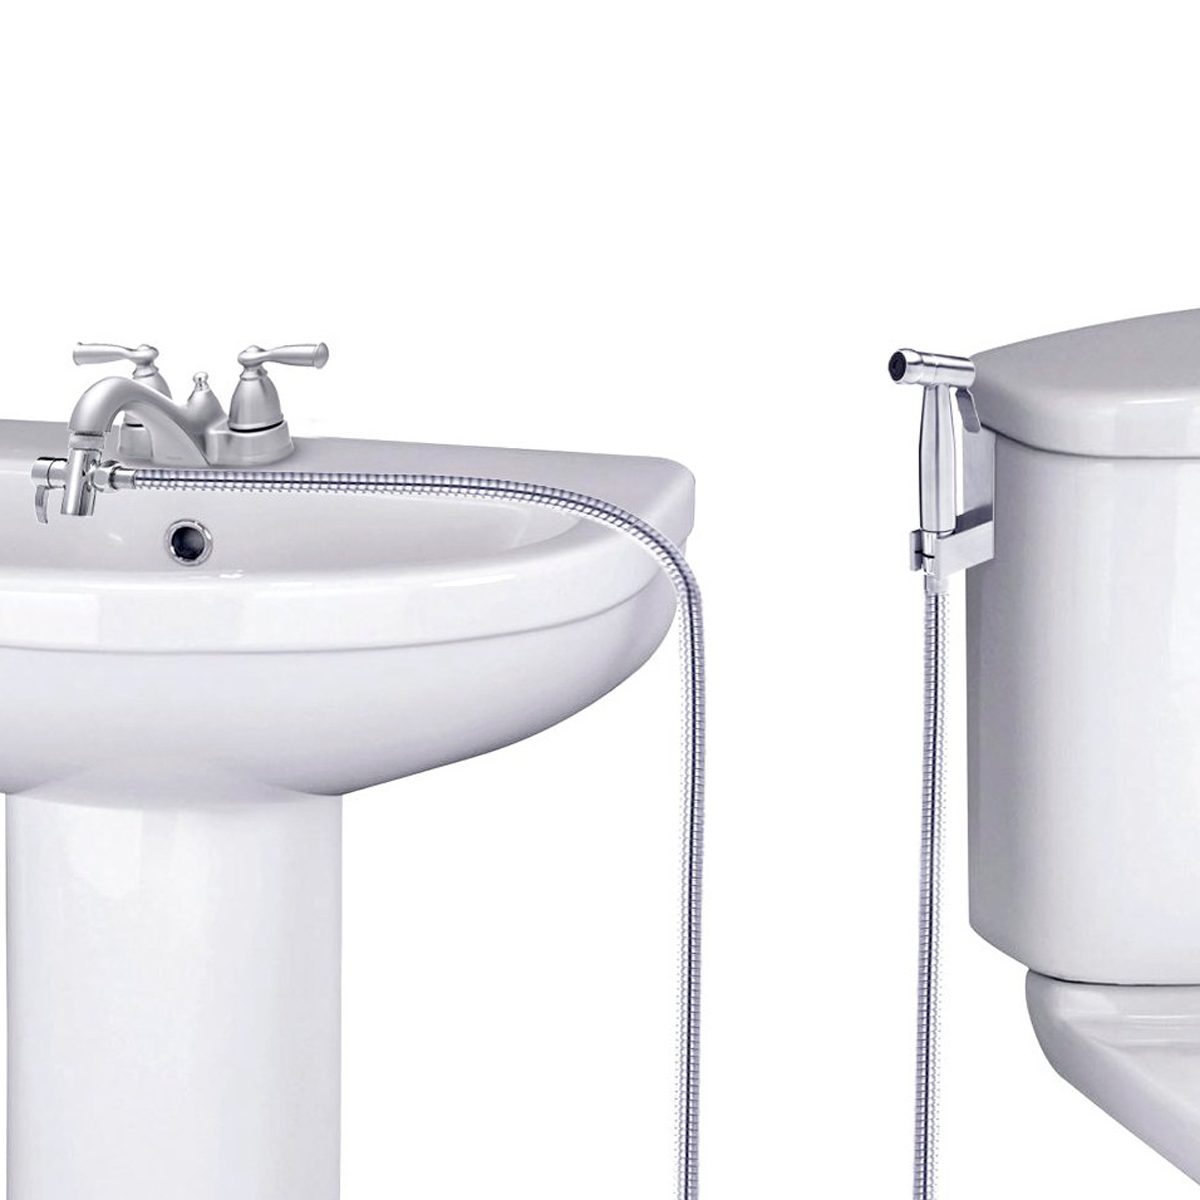 <p>Unlike models that attach to the toilet or wall, this <a href="https://www.amazon.com/dp/B01E4H7DTA/?tag=fhm_msn-20" rel="nofollow noopener noreferrer">sprayer bidet attachment</a> is meant to attach to the sink. Thus, it offers users hot and cold water for cleaning and rinsing. Buyers noted the long hose makes it a great option.</p> <p>"I'm loving using this as a warm-water bidet and will be using it to clean our cloth diapers once our little one arrives," says one buyer. "The strength of the water pressure can be controlled both at the faucet and at the sprayer nozzle (by not pushing as hard). This sprayer feels like it is made very well, a luxury item. Solid metal! The hose is long enough to go from my sink to my tub, so this may be used to clean our kiddos too."</p> <p>Plus, check out these <a href="https://www.familyhandyman.com/list/5-ways-you-can-unclog-a-toilet-bowl-without-a-plunger/">six ways you can unclog a toilet without a plunger</a>.</p> <p class="listicle-page__cta-button-shop"><a class="shop-btn" href="https://www.amazon.com/dp/B01E4H7DTA/?tag=fhm_msn-20">Shop Now</a></p>